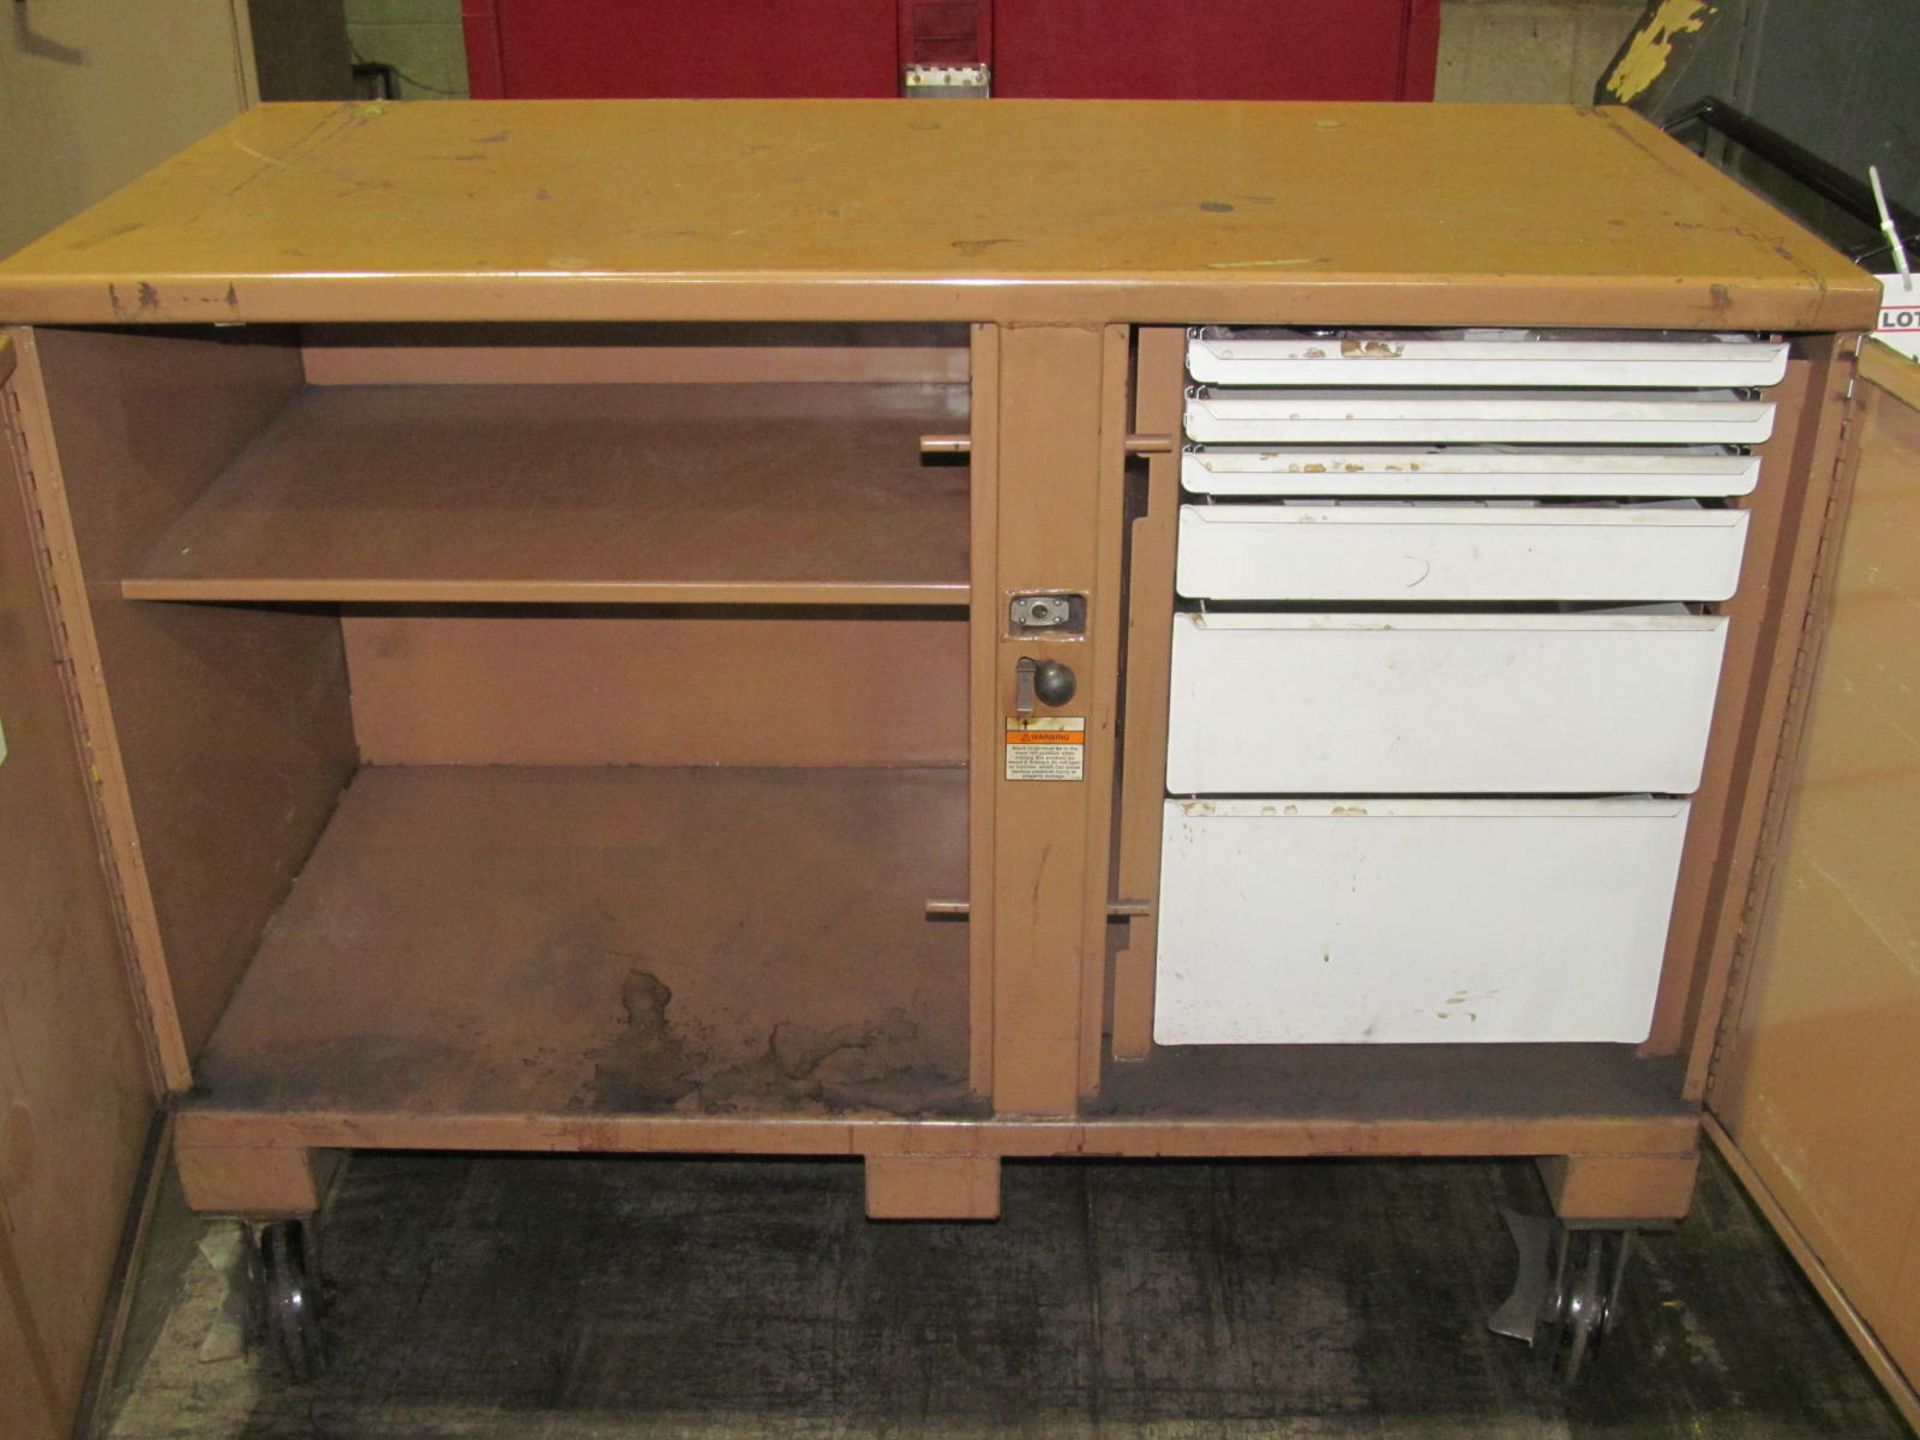 KNAACK #58 STORAGE MASTER TOOL CHEST, MOUNTED ON CASTERS, (LOC. P29) - Image 2 of 2